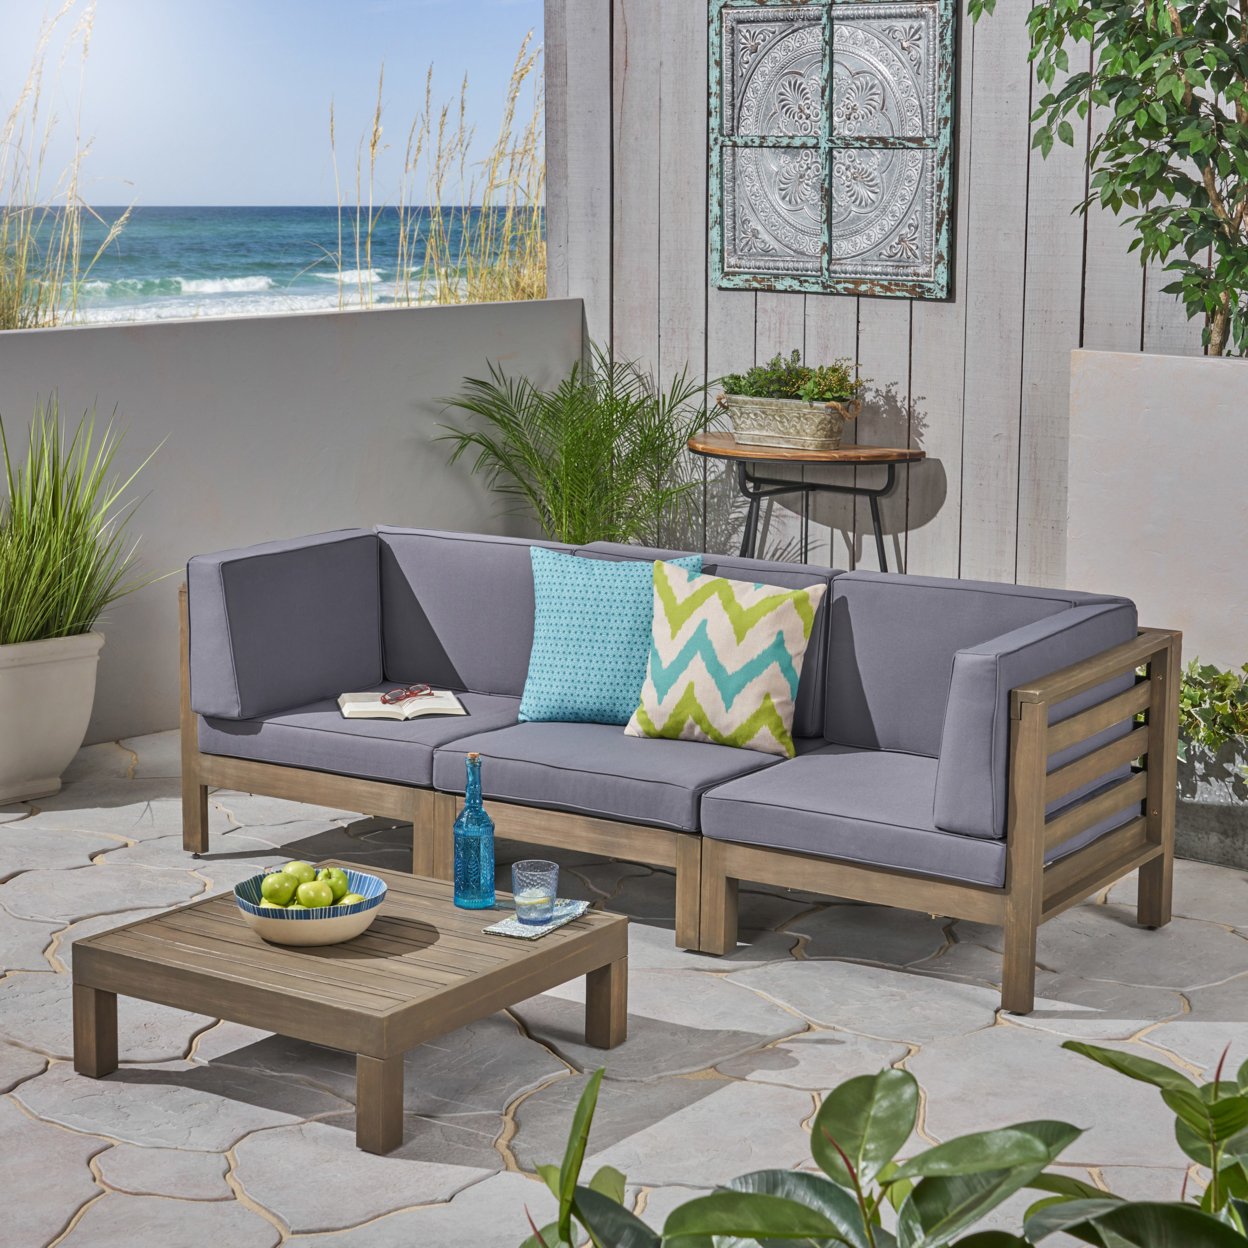 Great Deal Furniture Dawson Outdoor Sectional Sofa Set With Coffee Table - 4-Piece 3-Seater - Acacia Wood - Outdoor Cushions - Dark Gray